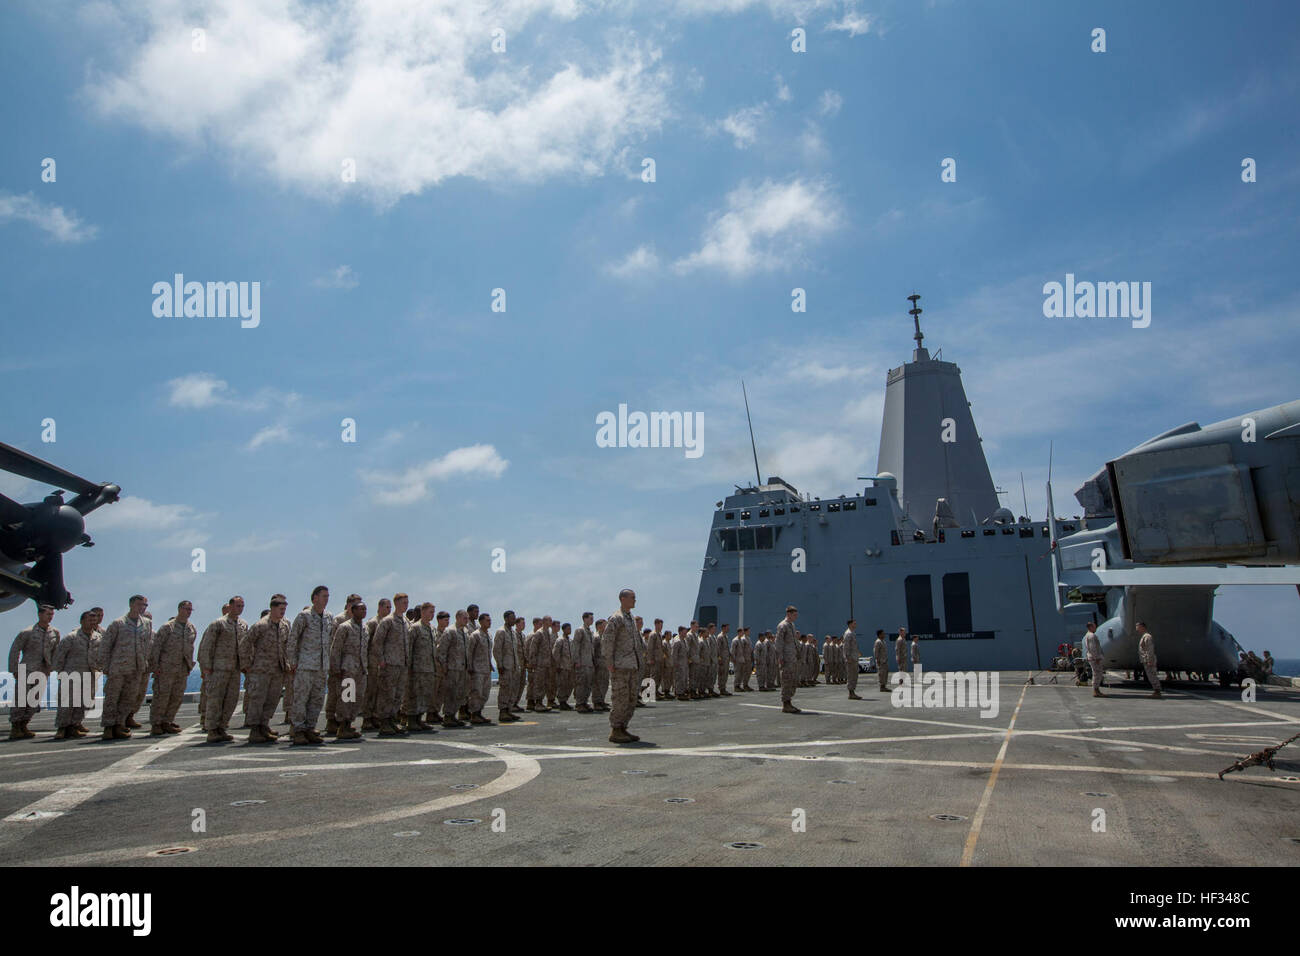 Marines with Combat Logistics Battalion 24, 24th Marine Expeditionary Unit stand in formation for an award ceremony aboard the USS New York (LPD 21), March 19, 2015. The 24th MEU is embarked on the ships of the Iwo Jima Amphibious Ready Group and deployed to maintain regional security in the U.S. 5th Fleet area of operations. (U.S. Marine Corps photo by Cpl. Todd F. Michalek) Marine Awarded Navy Commendation Medal 150319-M-YH418-001 Stock Photo